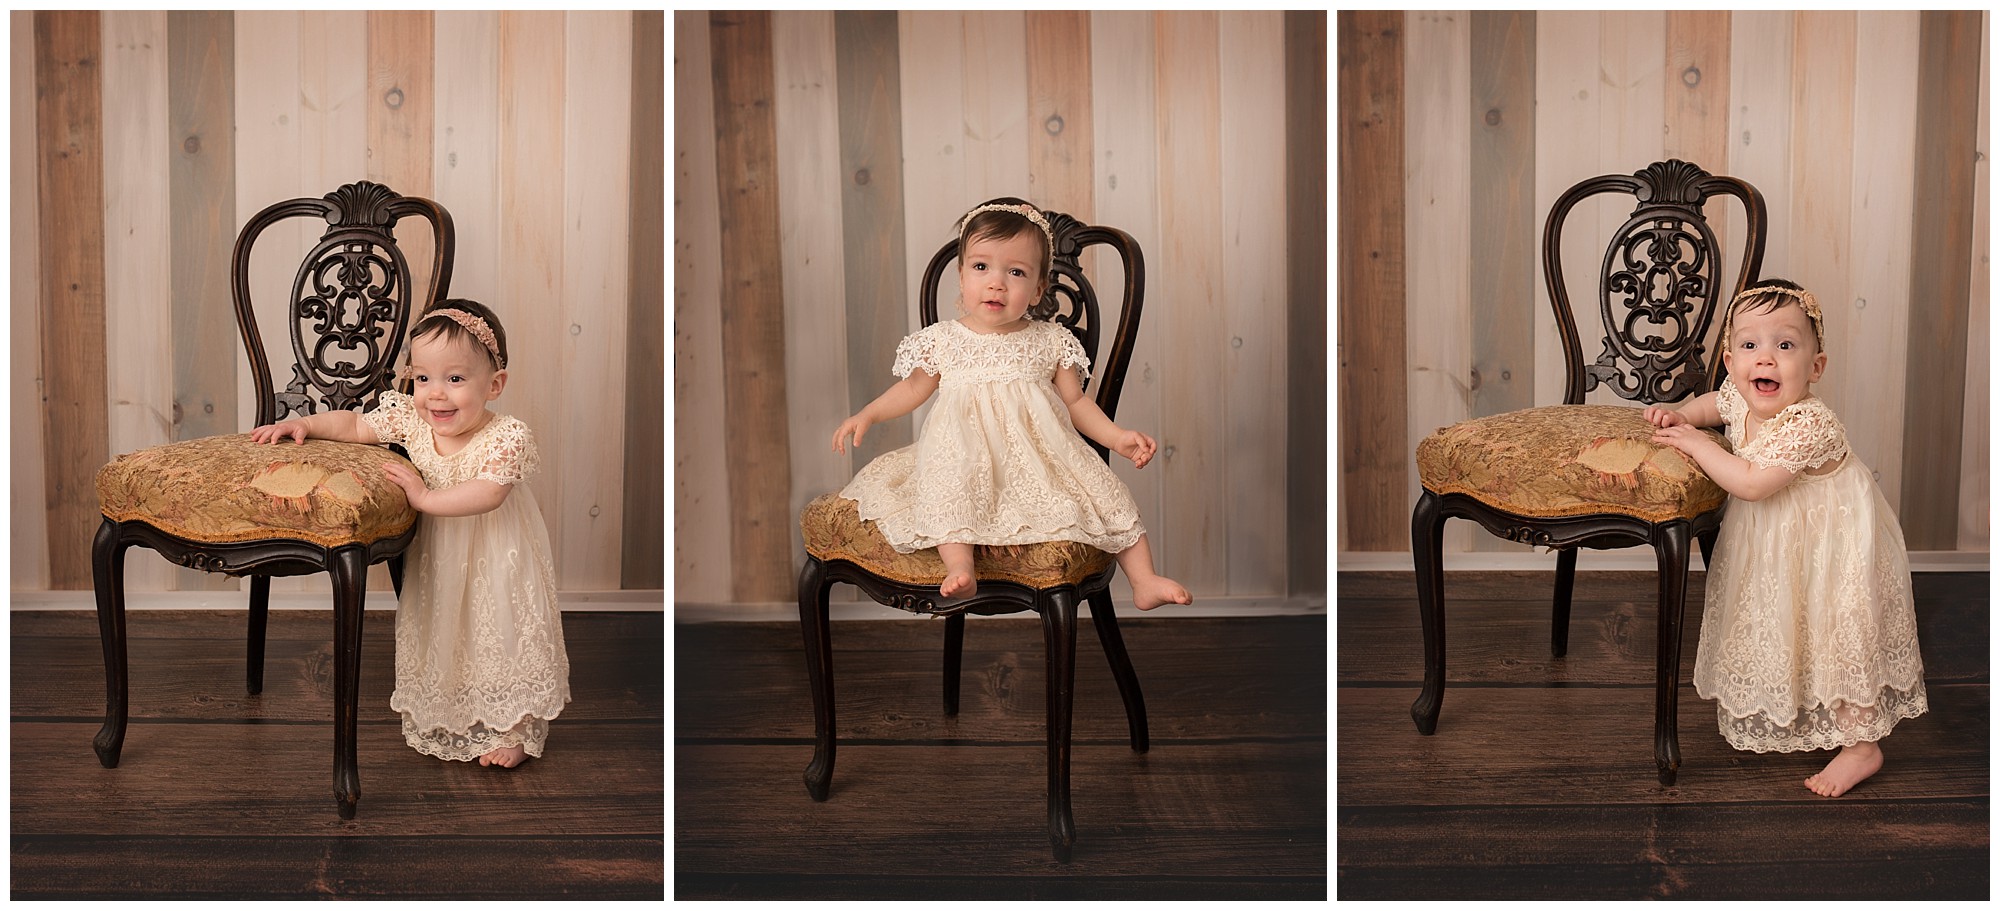 triplets girls in lace dresses by a vintage chair